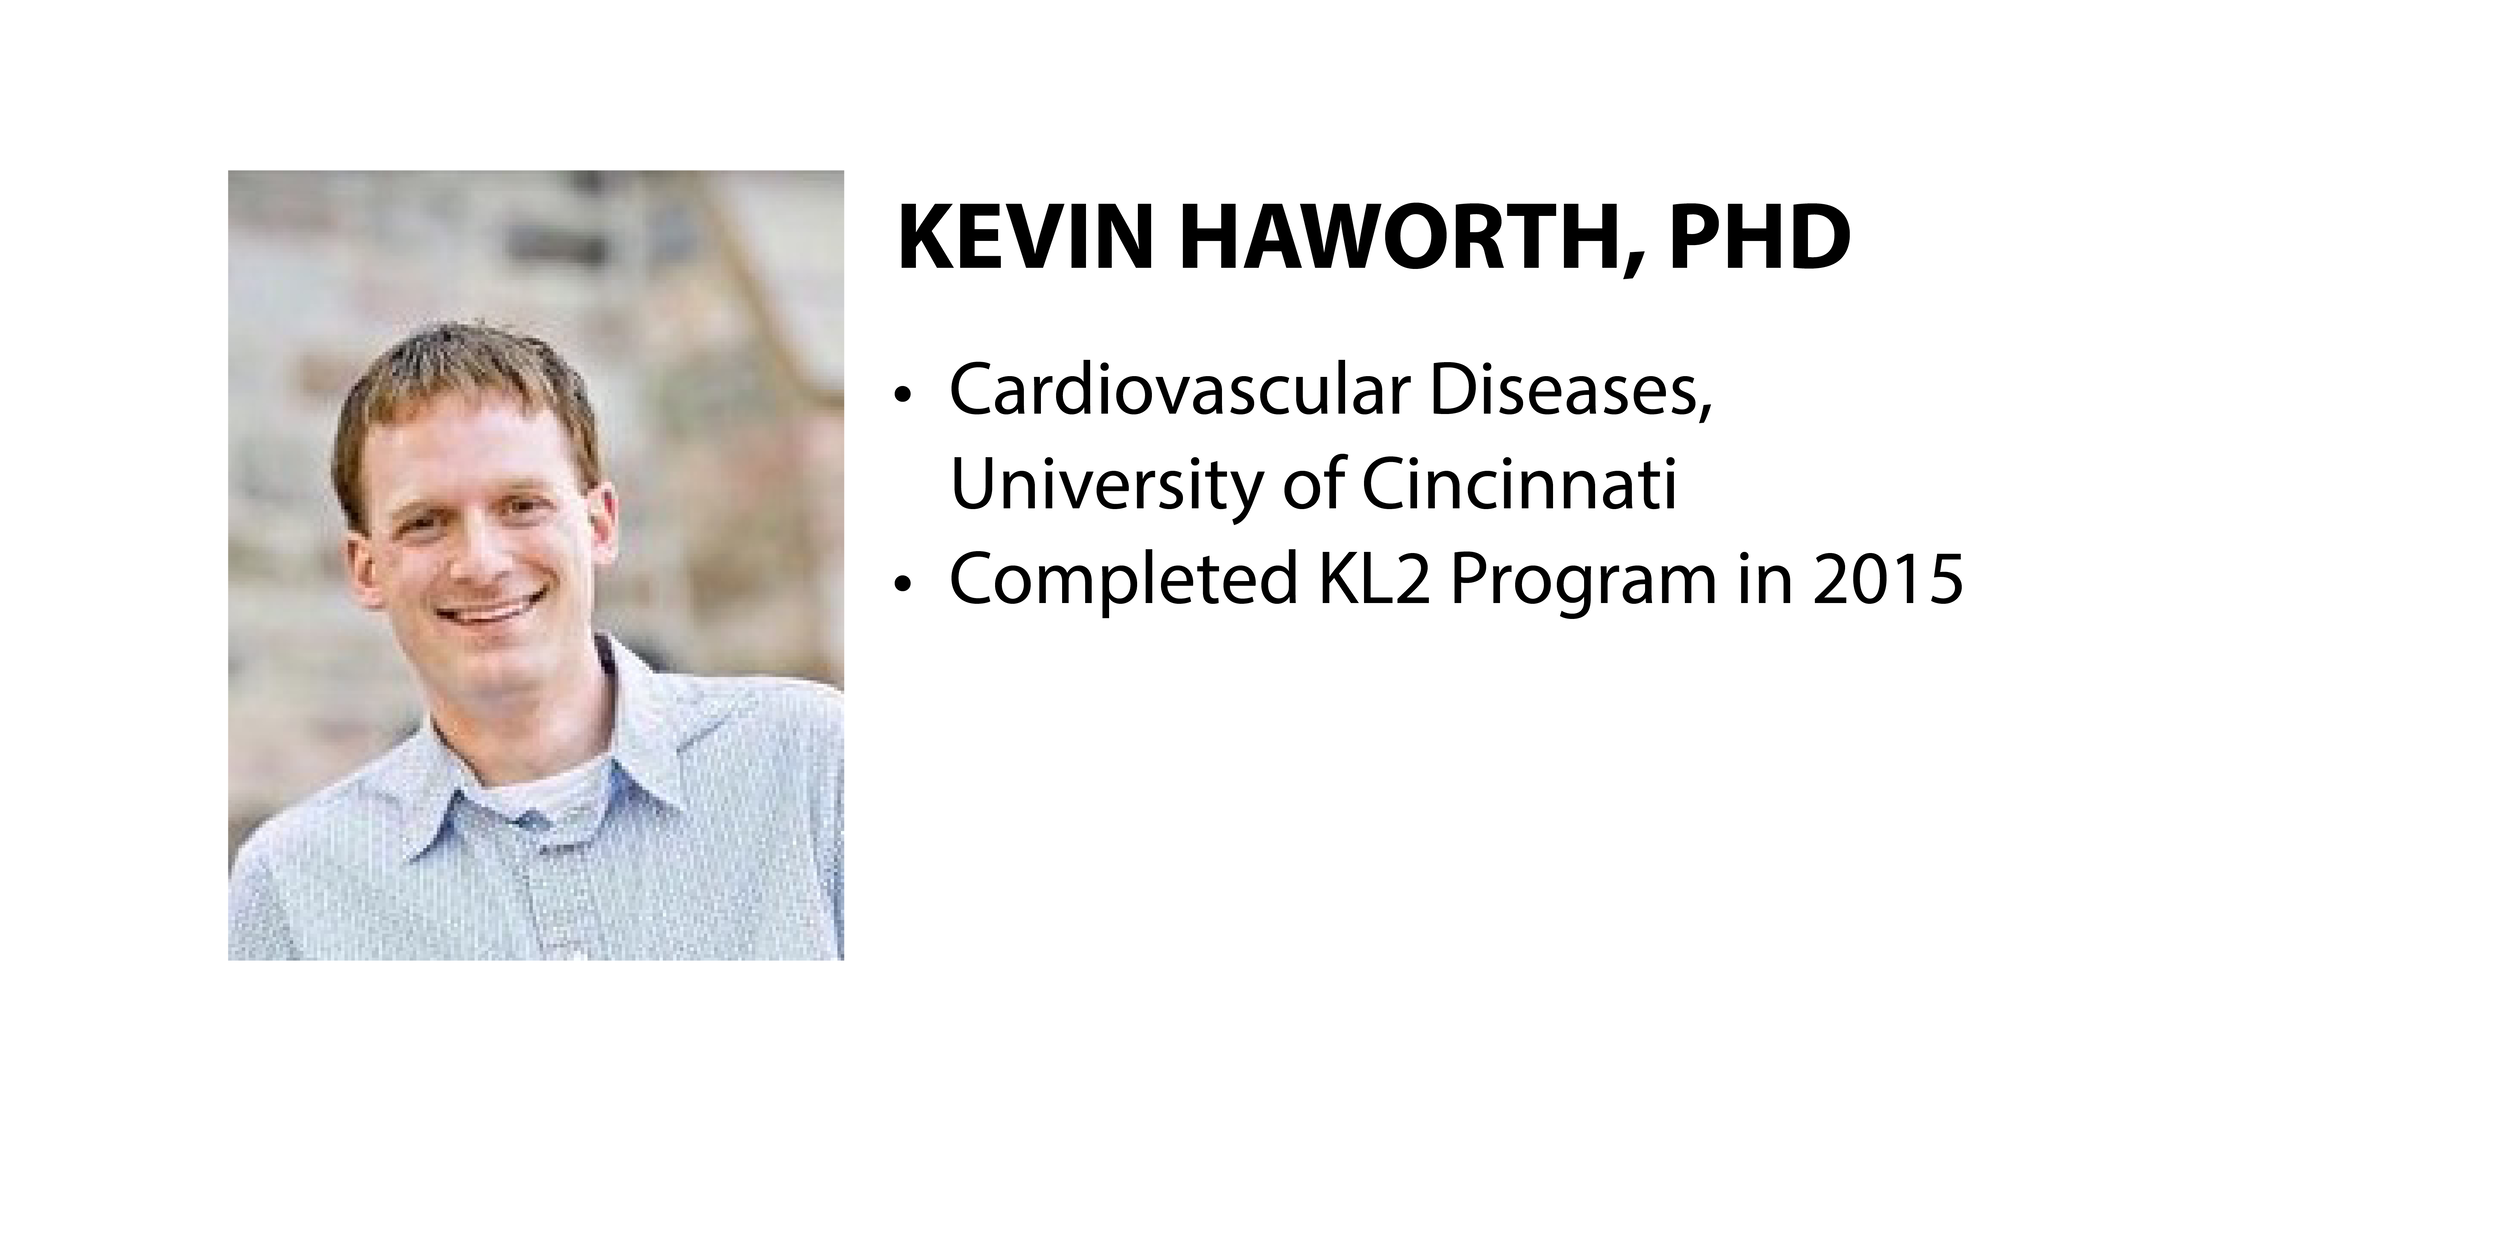 K Scholar Overview: Kevin Haworth